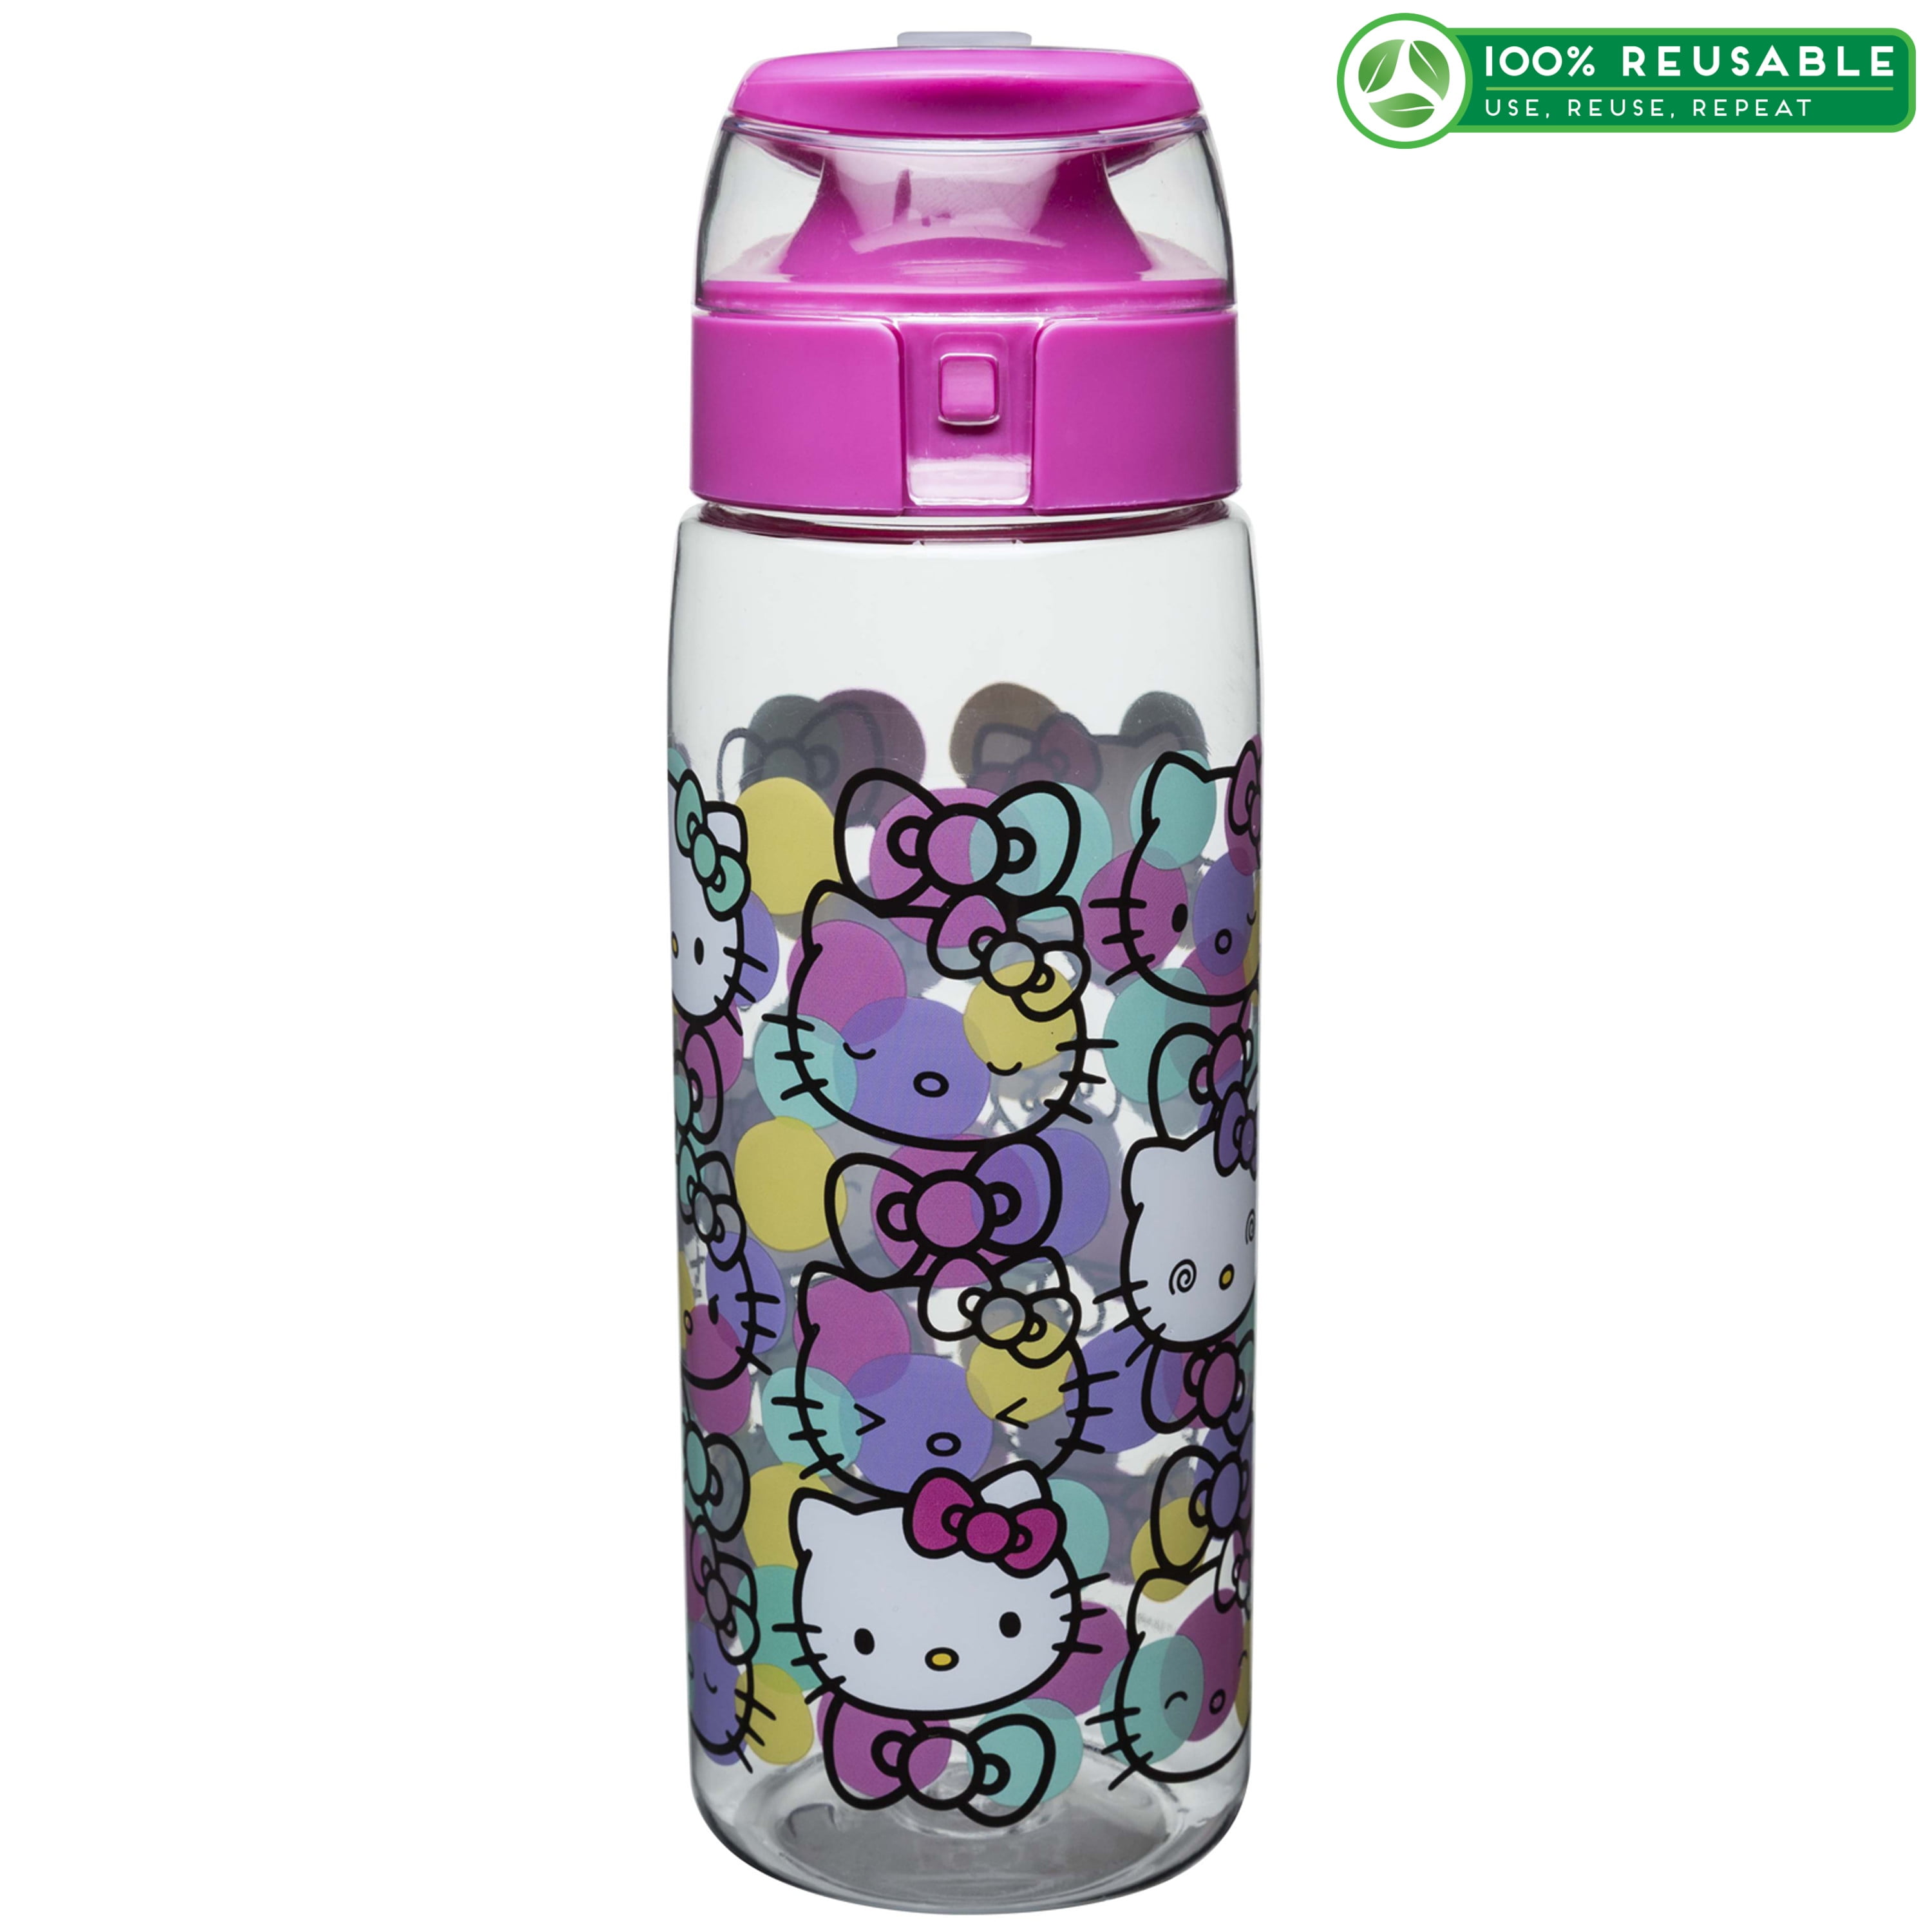 Planet Zak's Good to Go Hello Kitty 12-Ounce Double Wall Stainless Steel Canteen